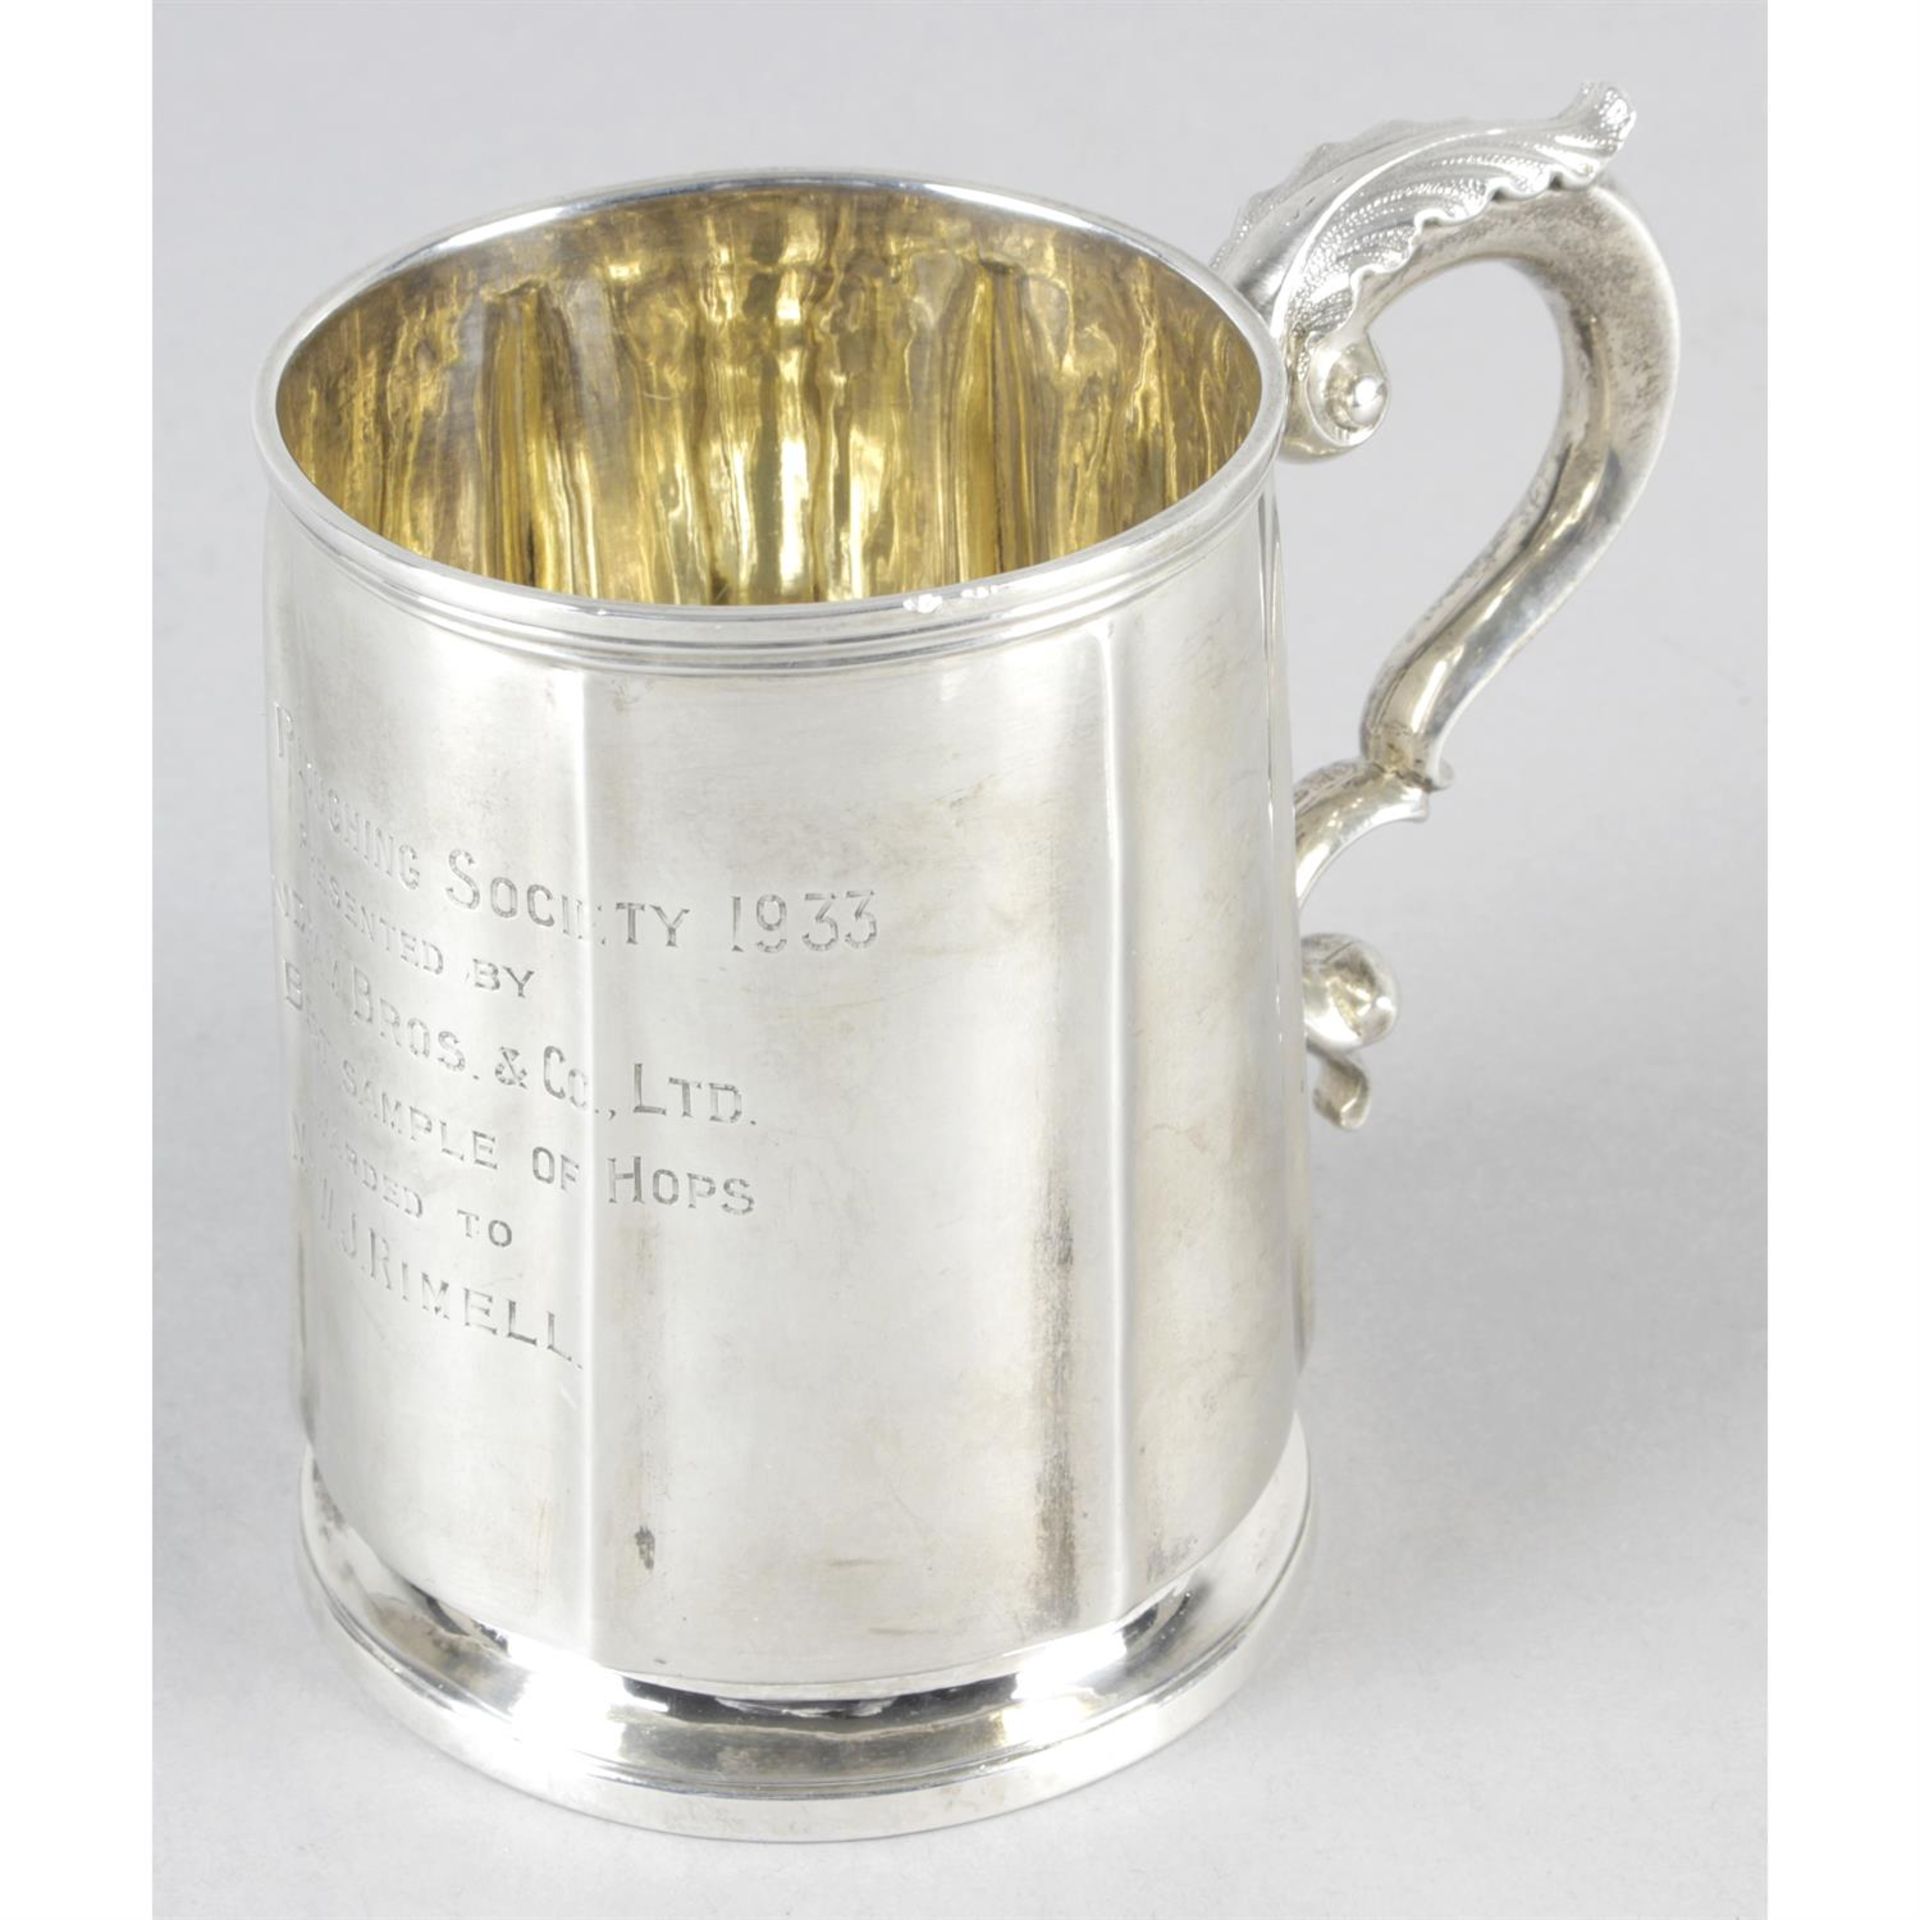 An early Victorian silver mug with later presentation engraving.